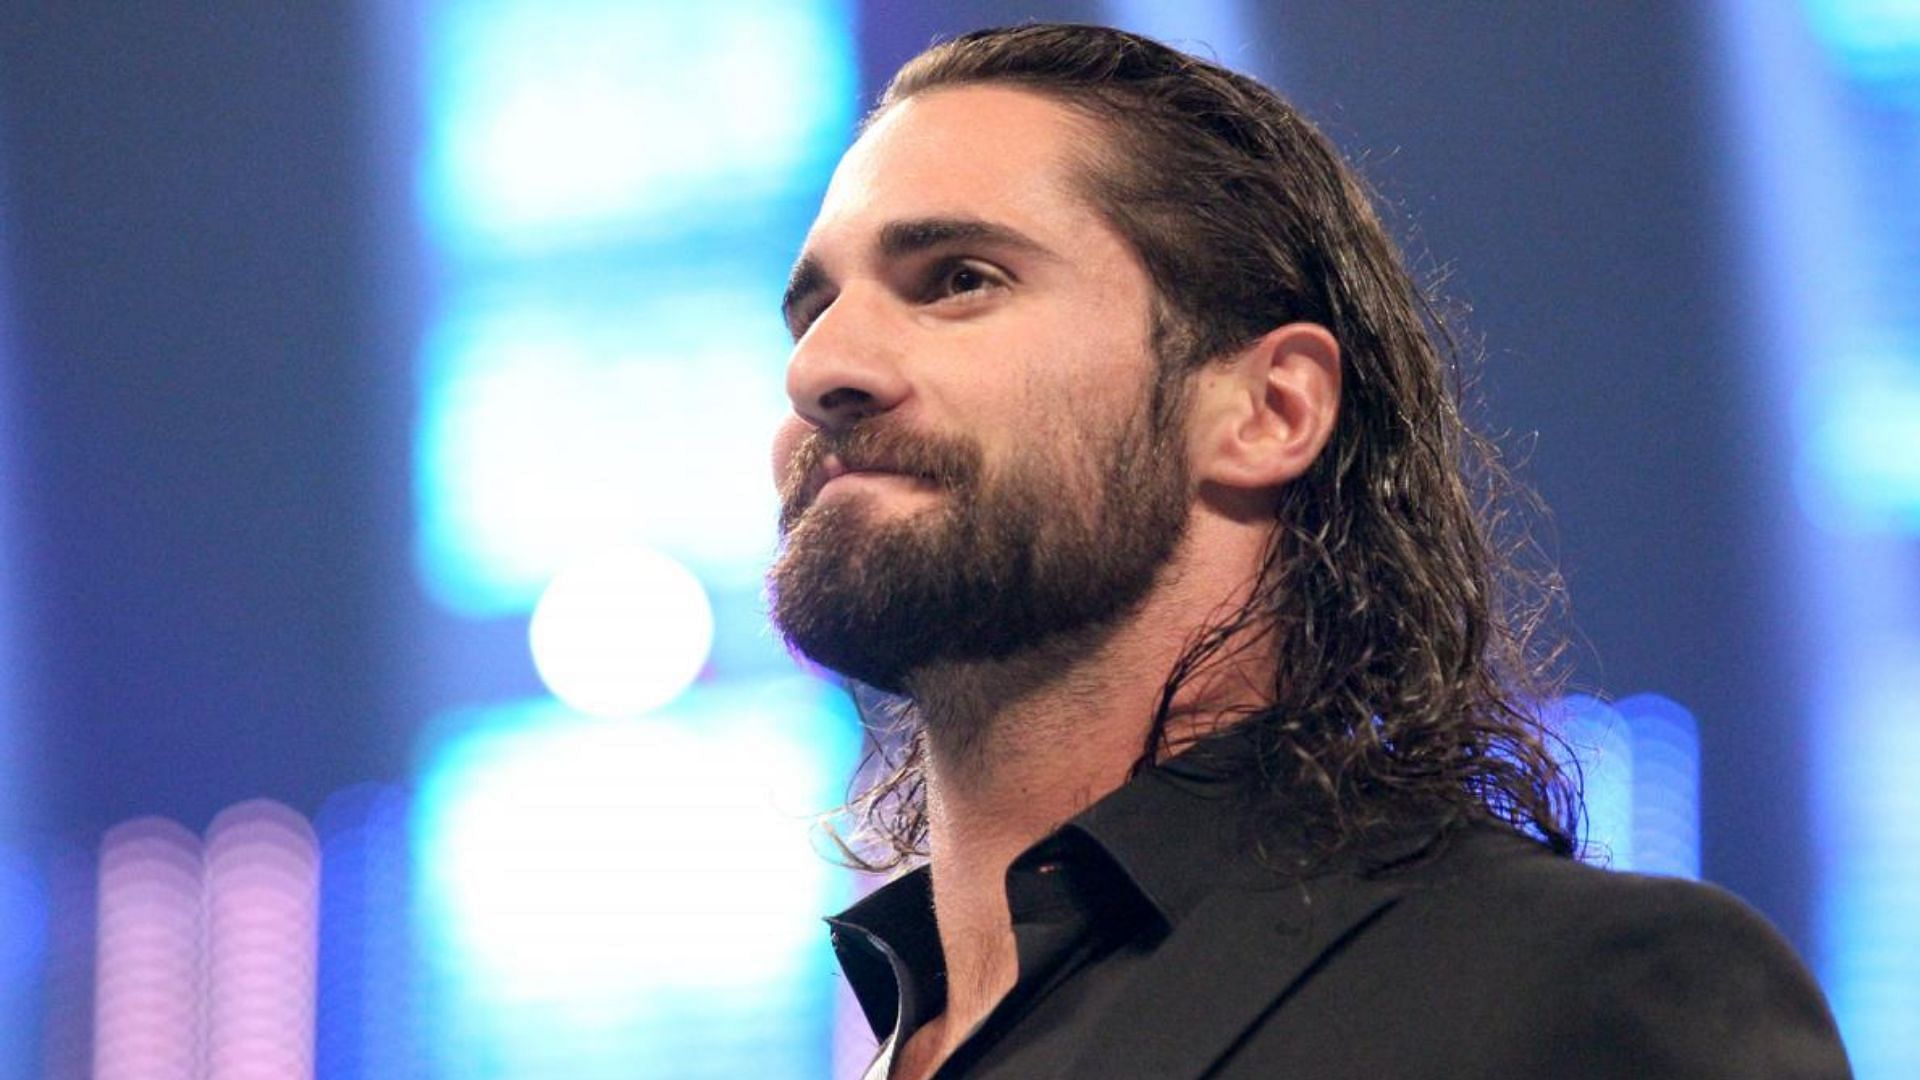 WWE Superstar Seth Rollins delivering a promo in the ring